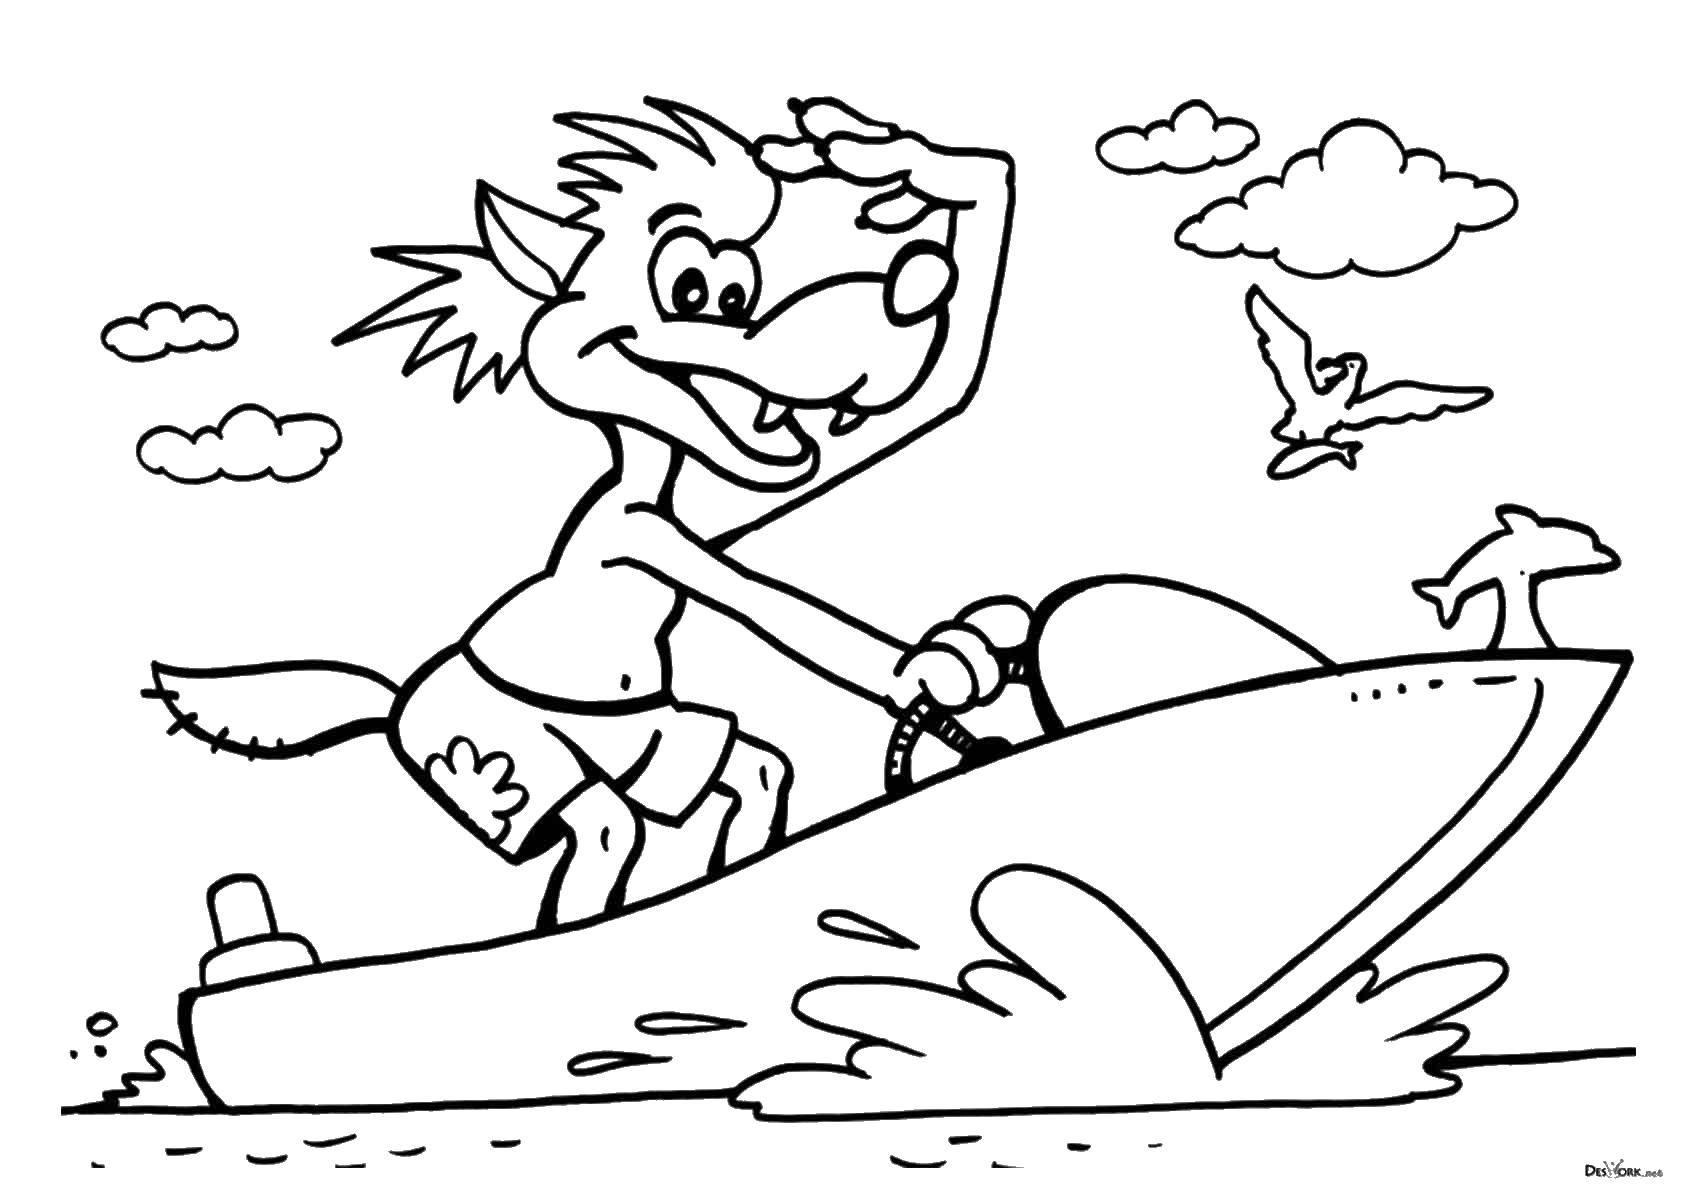 Coloring The wolf on the boat. Category cartoons. Tags:  wolf, boat.